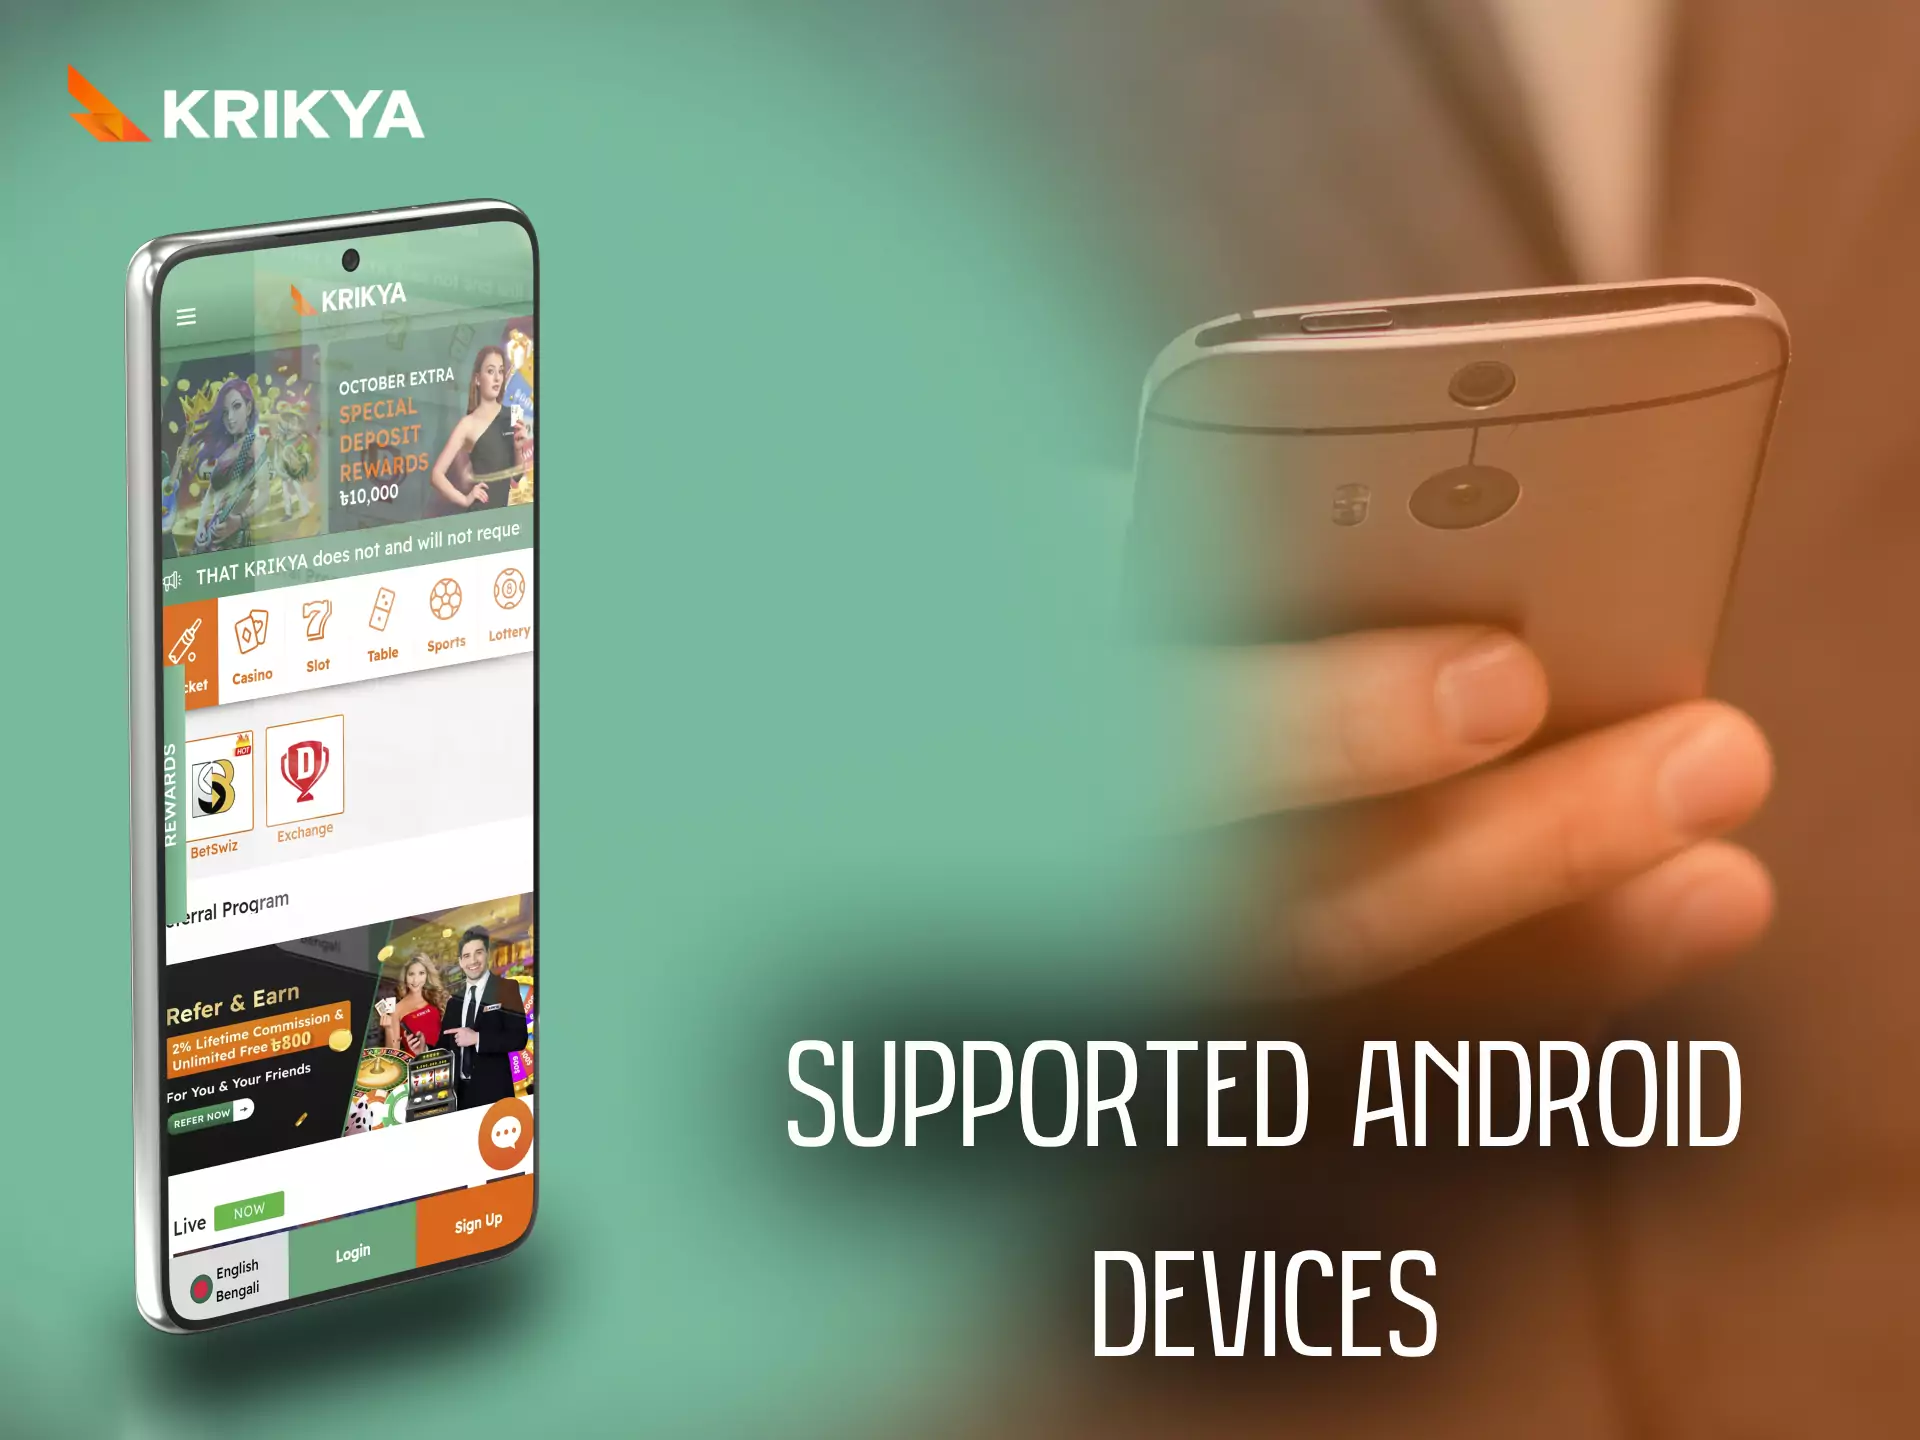 The Krikya app is supported on various Android devices.